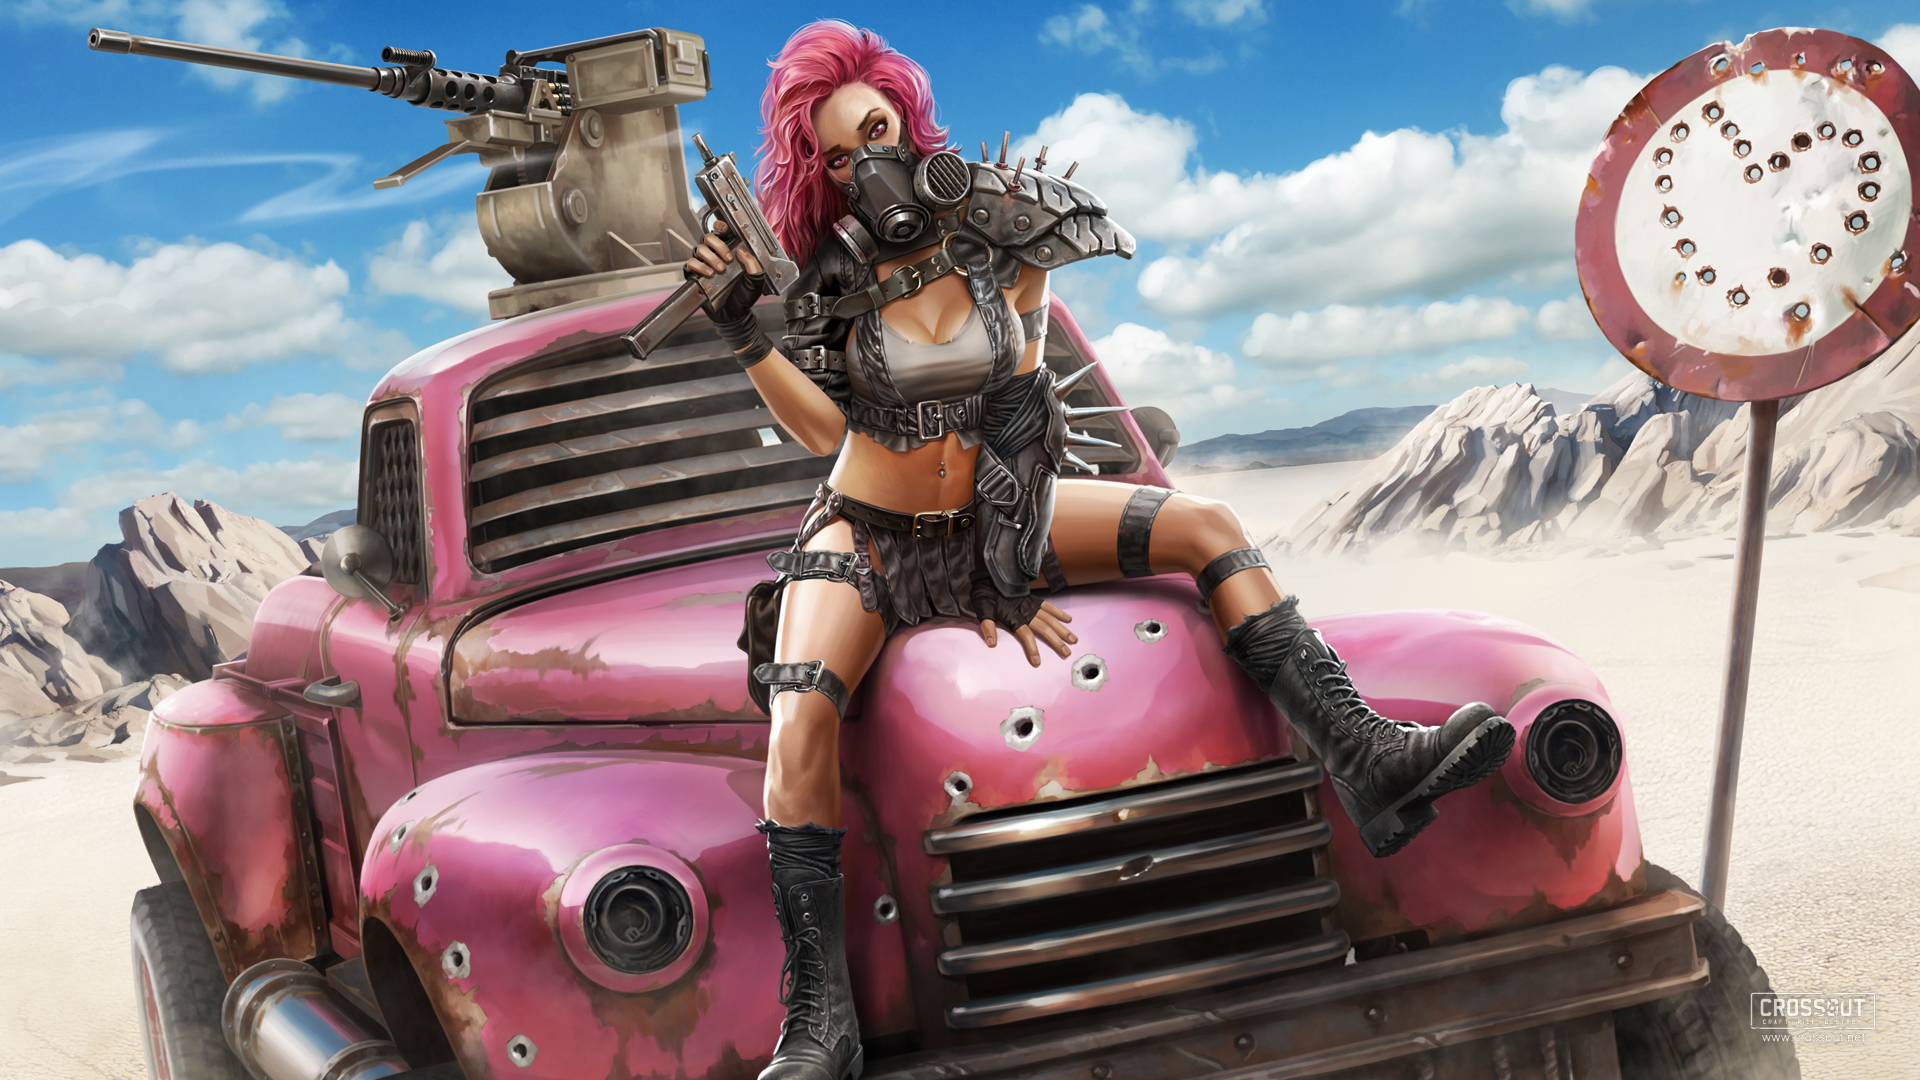 Video Game Crossout HD Wallpaper Background Image.